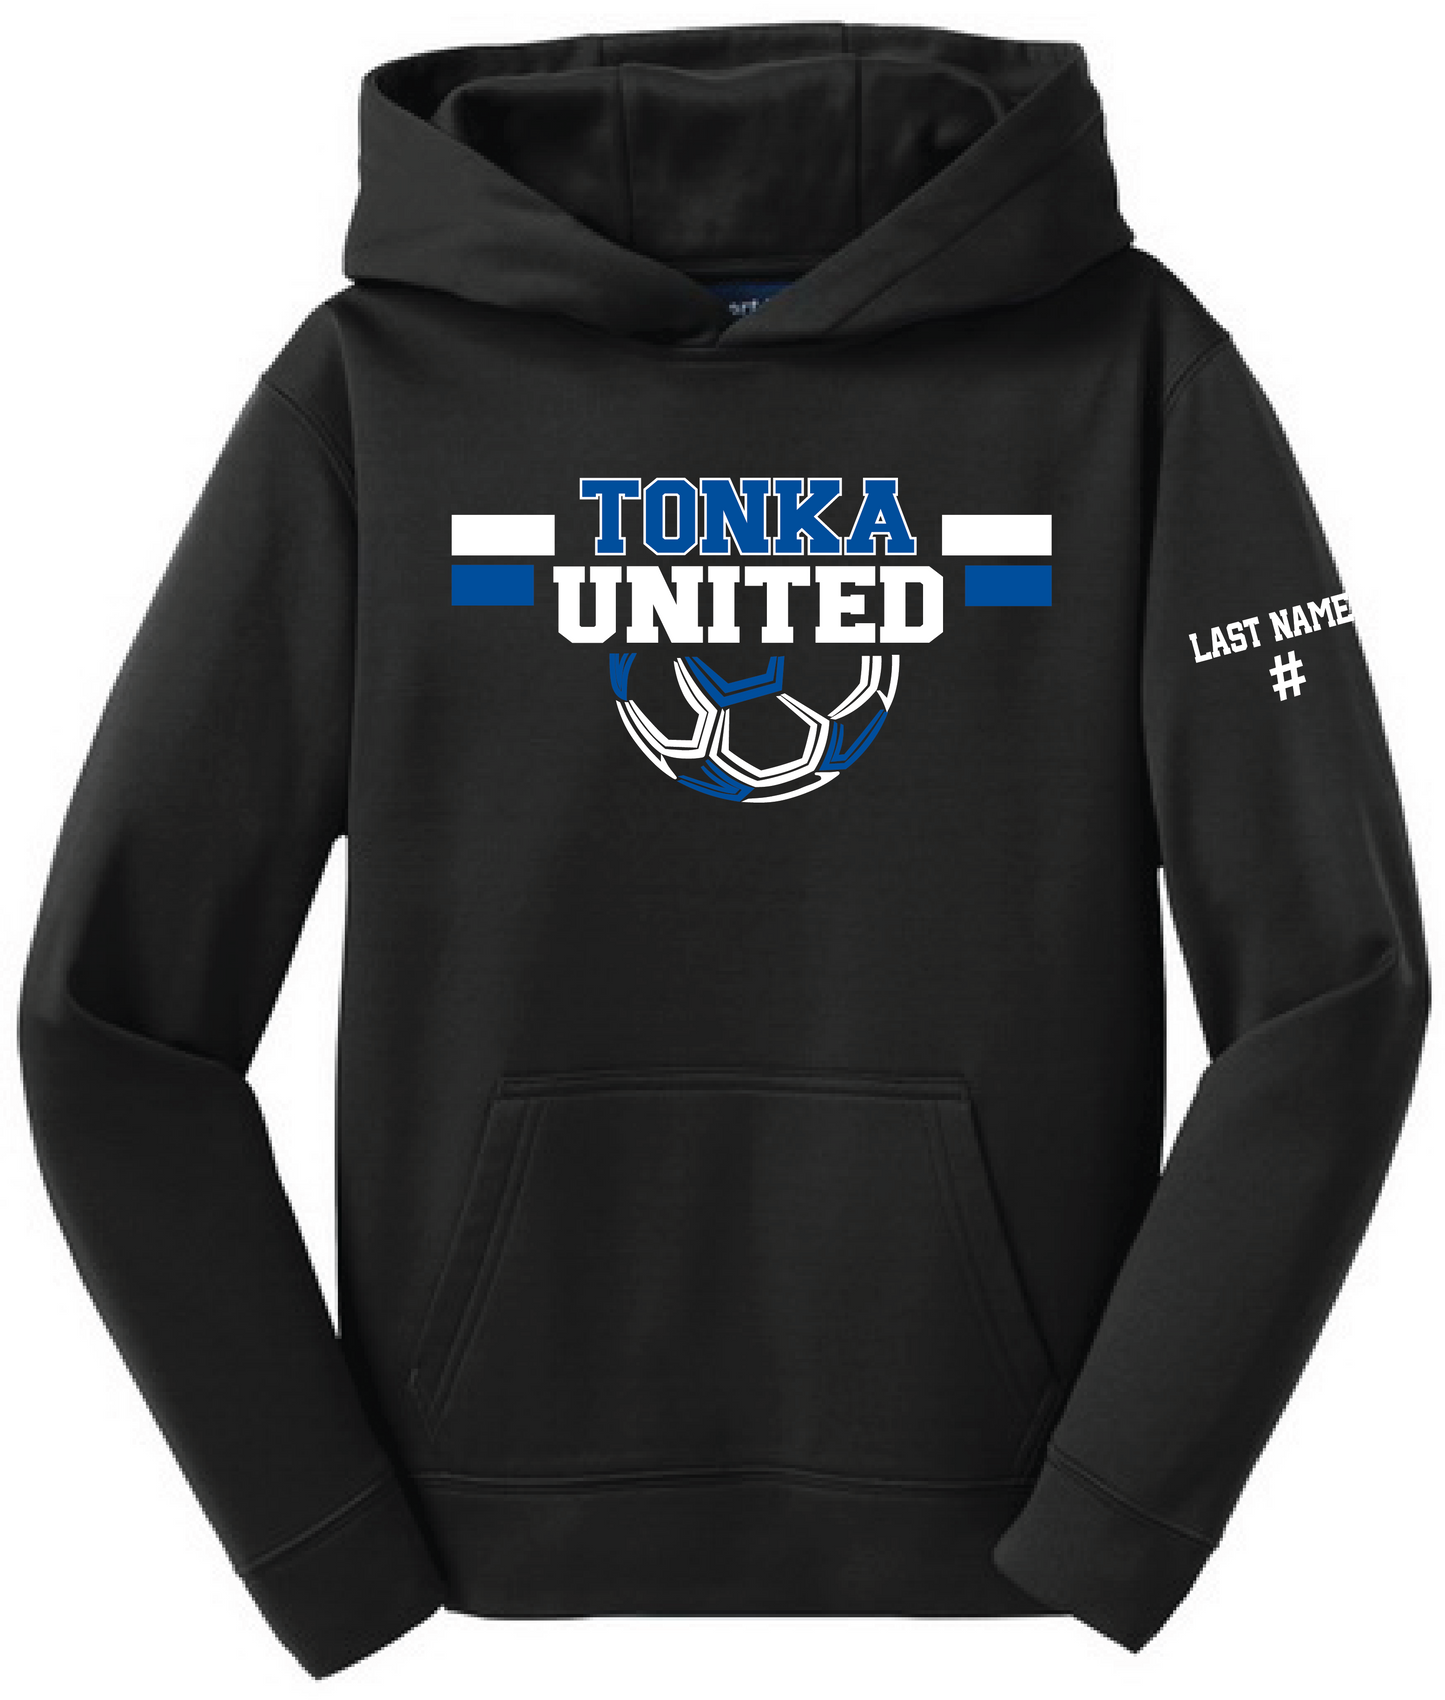 Tonka United Youth Unisex Mid-Weight Sport-Wick Performance Hoodie